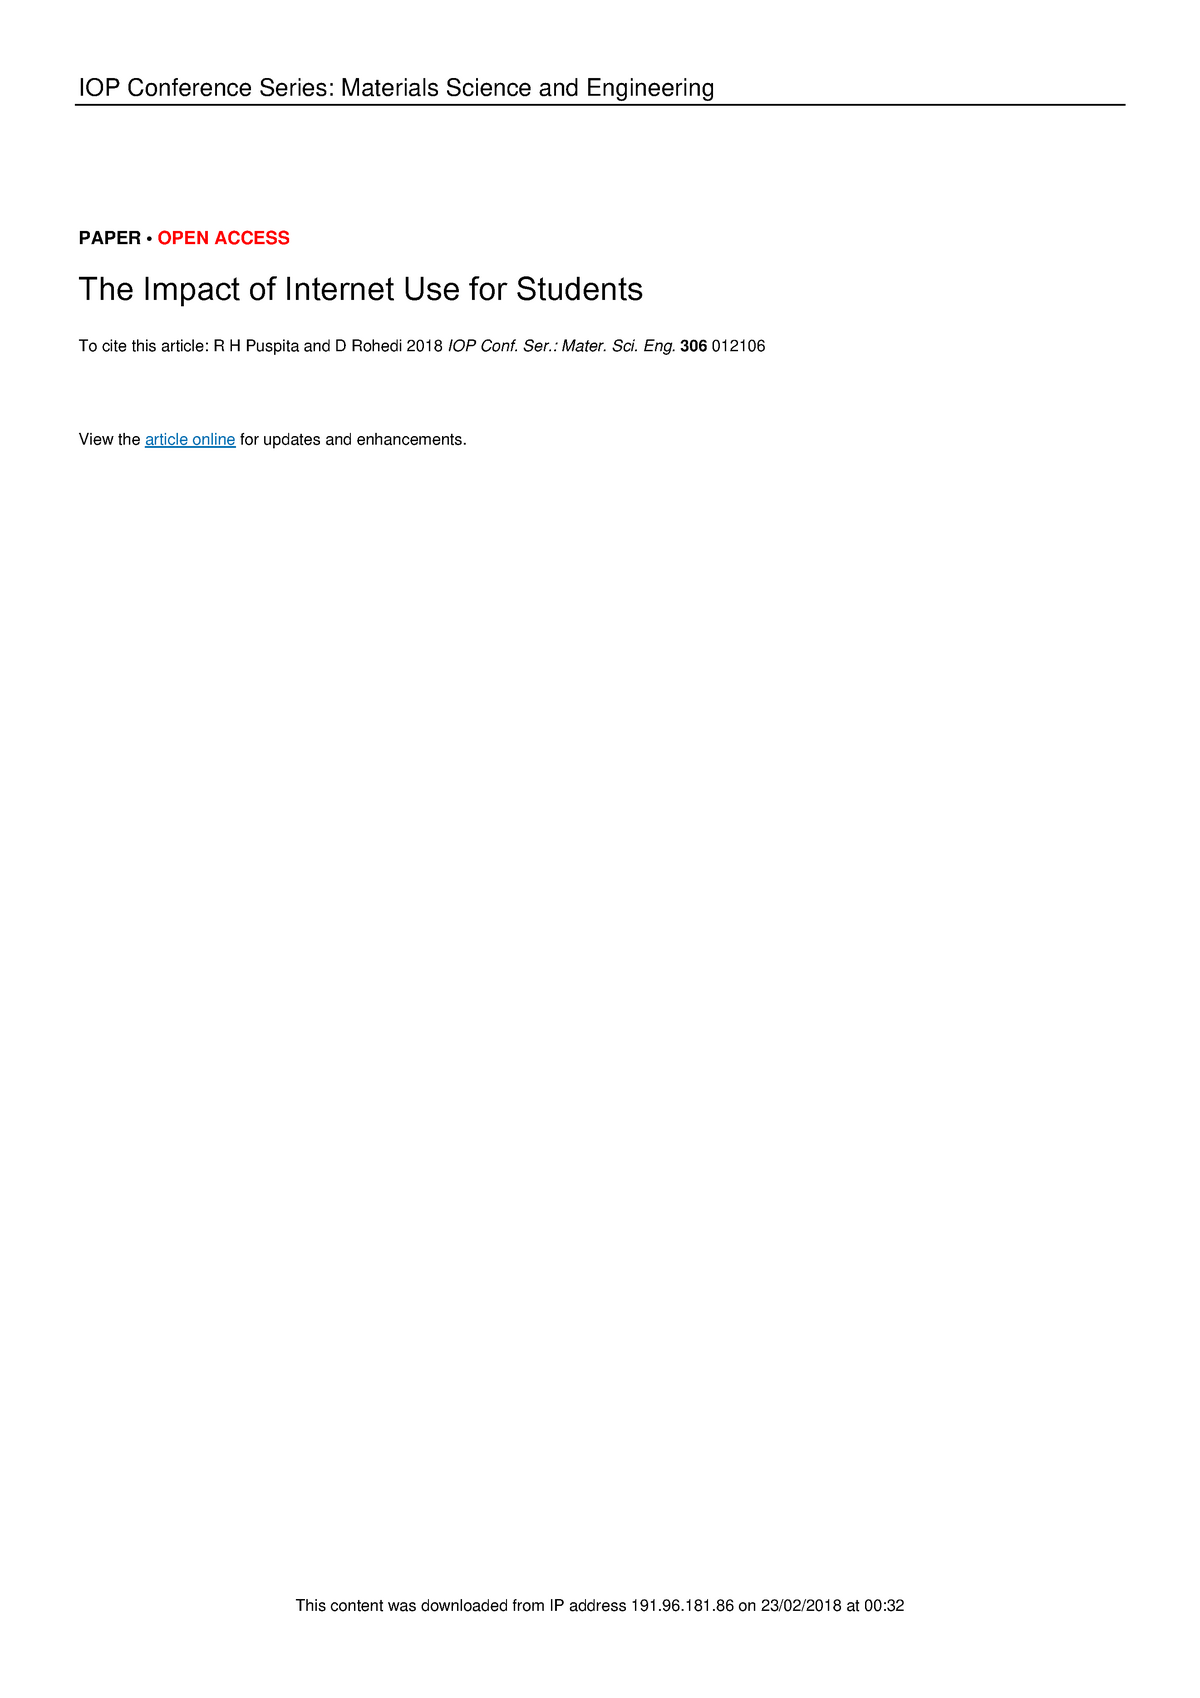 impact of internet on students